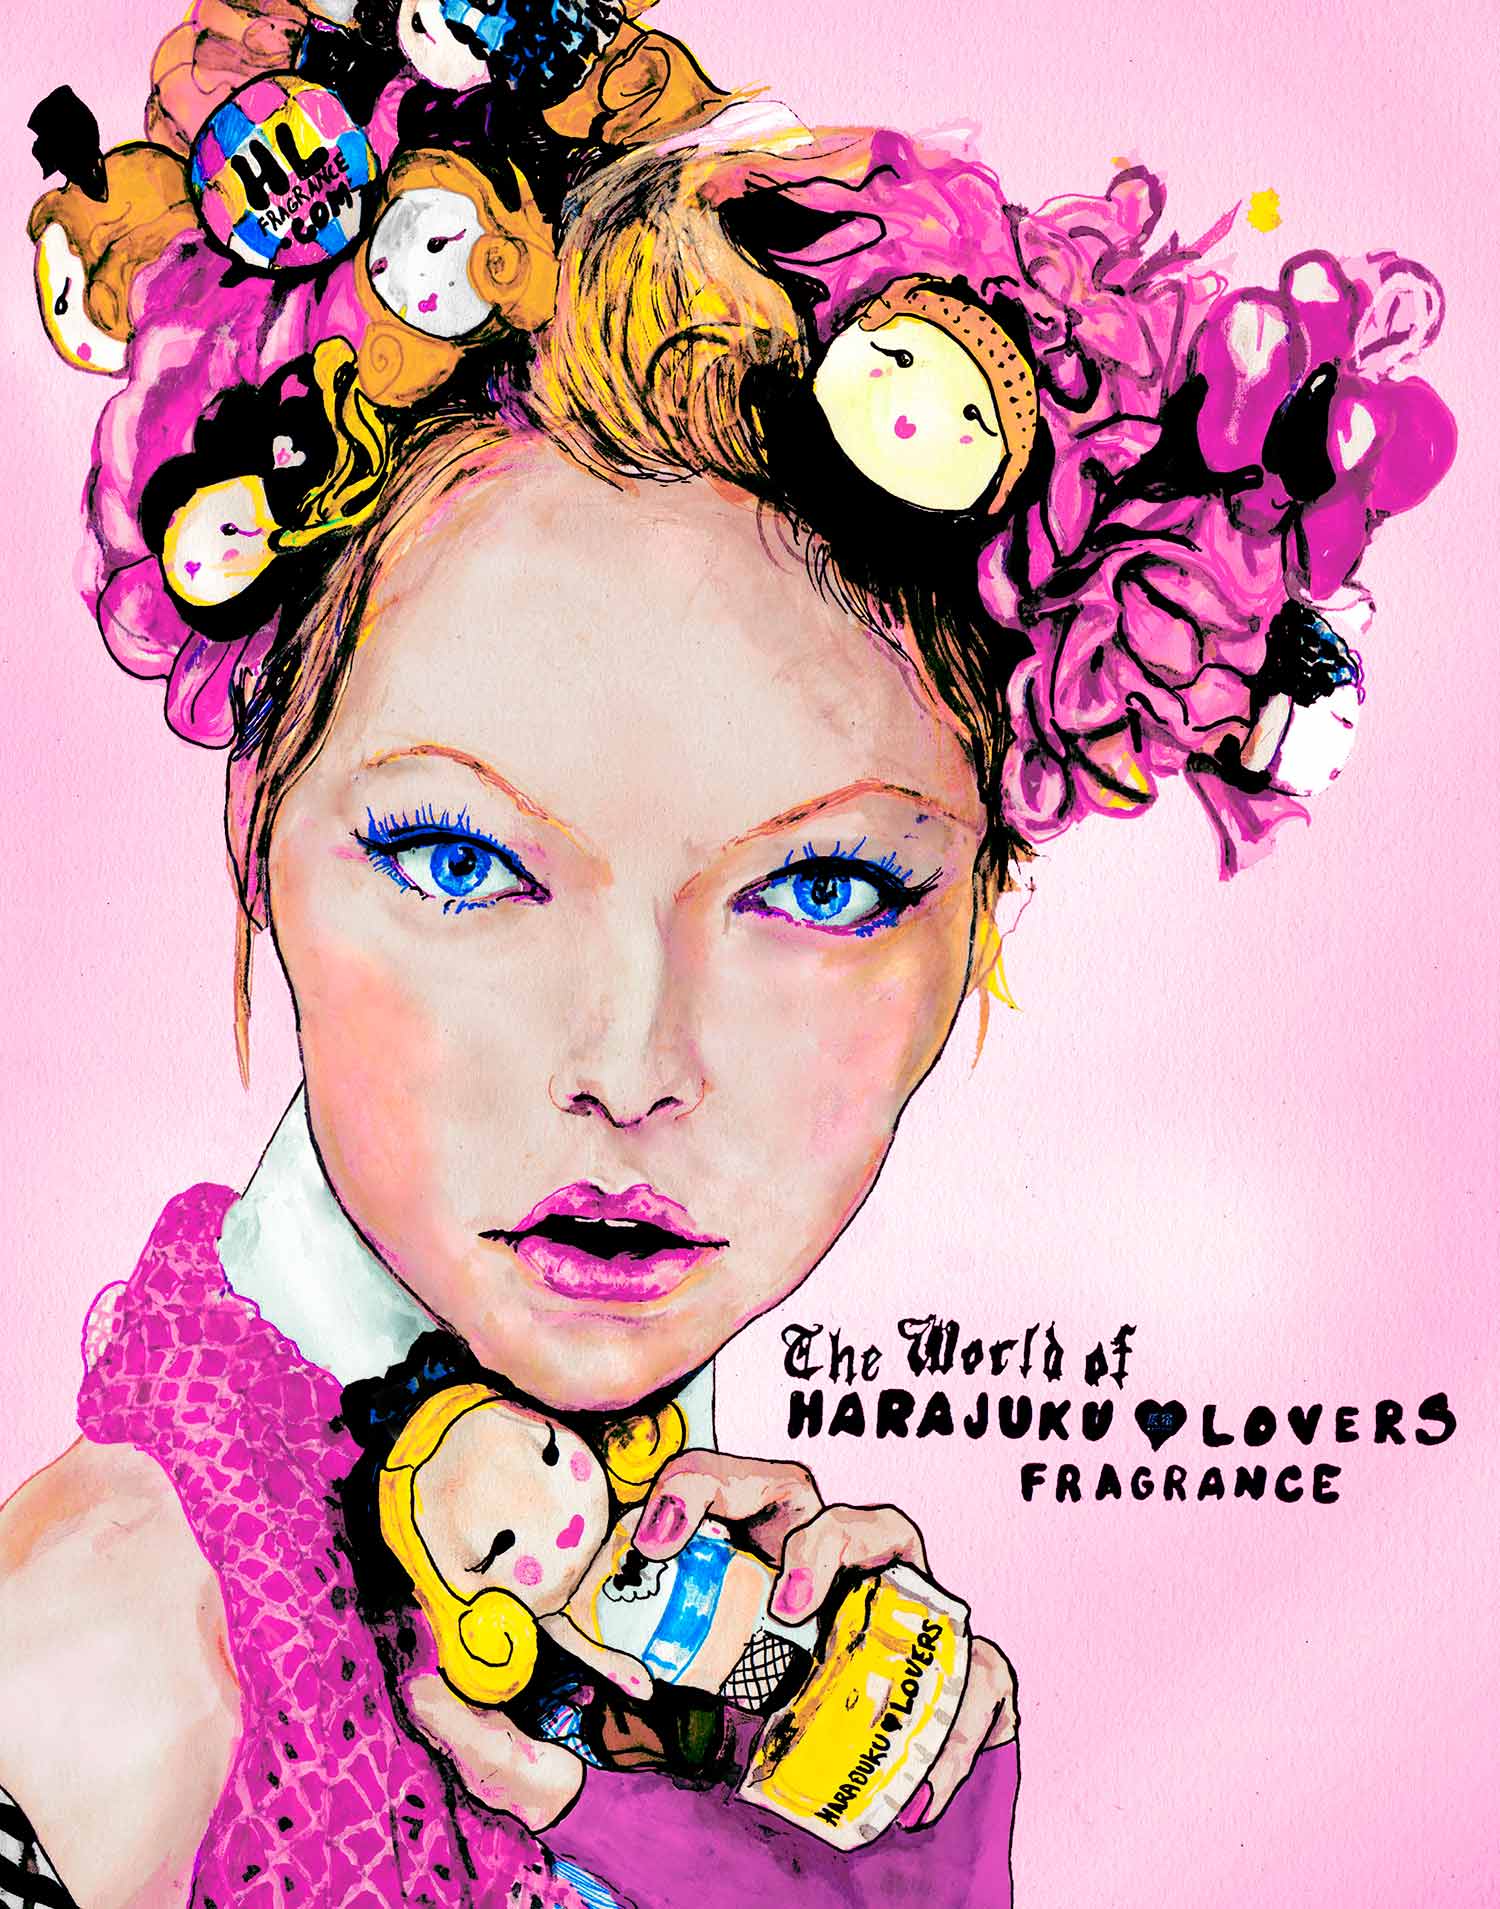 This picture is a drawing artist, Danny Roberts, did of a Harajuku Lovers Fragrance ad